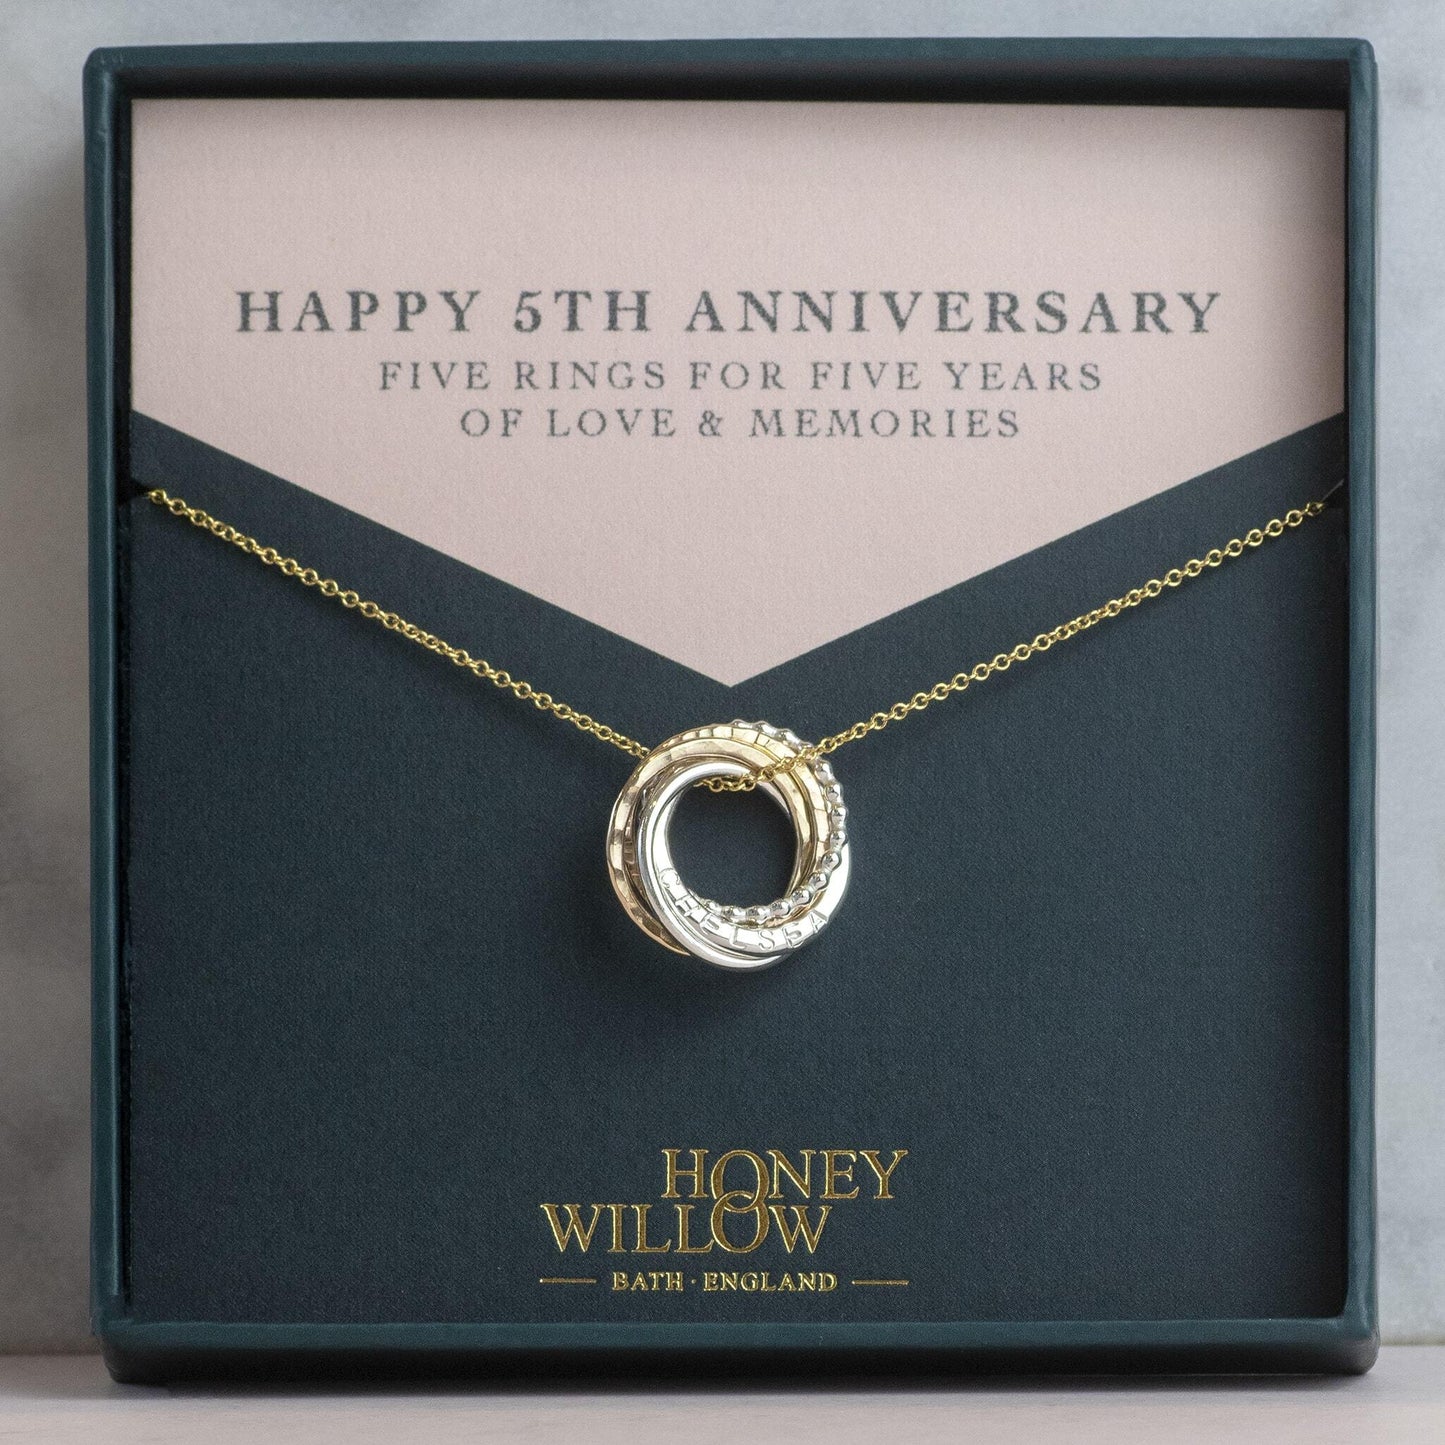 Personalised 5th Anniversary Necklace - Hand-Stamped - The Original 5 Rings for 5 Years Necklace - Petite Silver & Gold